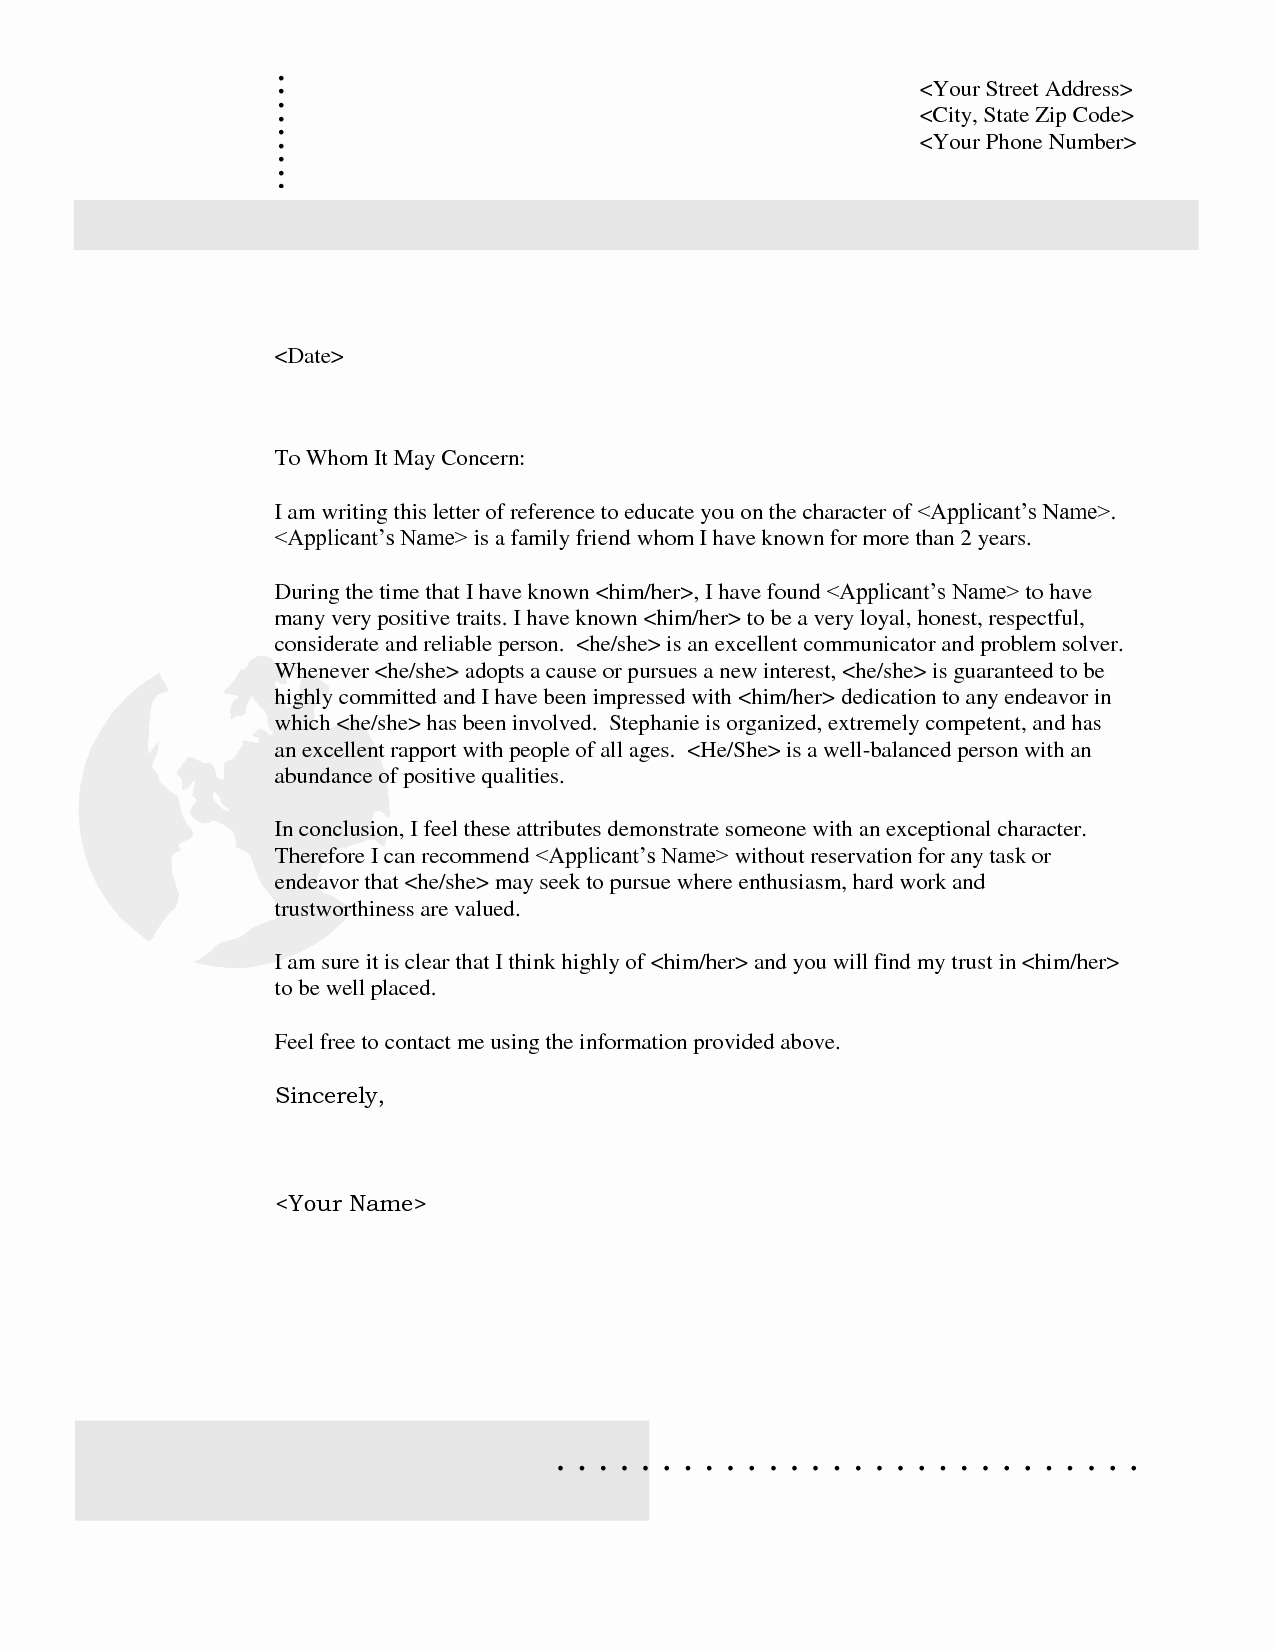 Personal Recommendation Letter Sample Fresh Character Reference Letter Yahoo Image Search Results